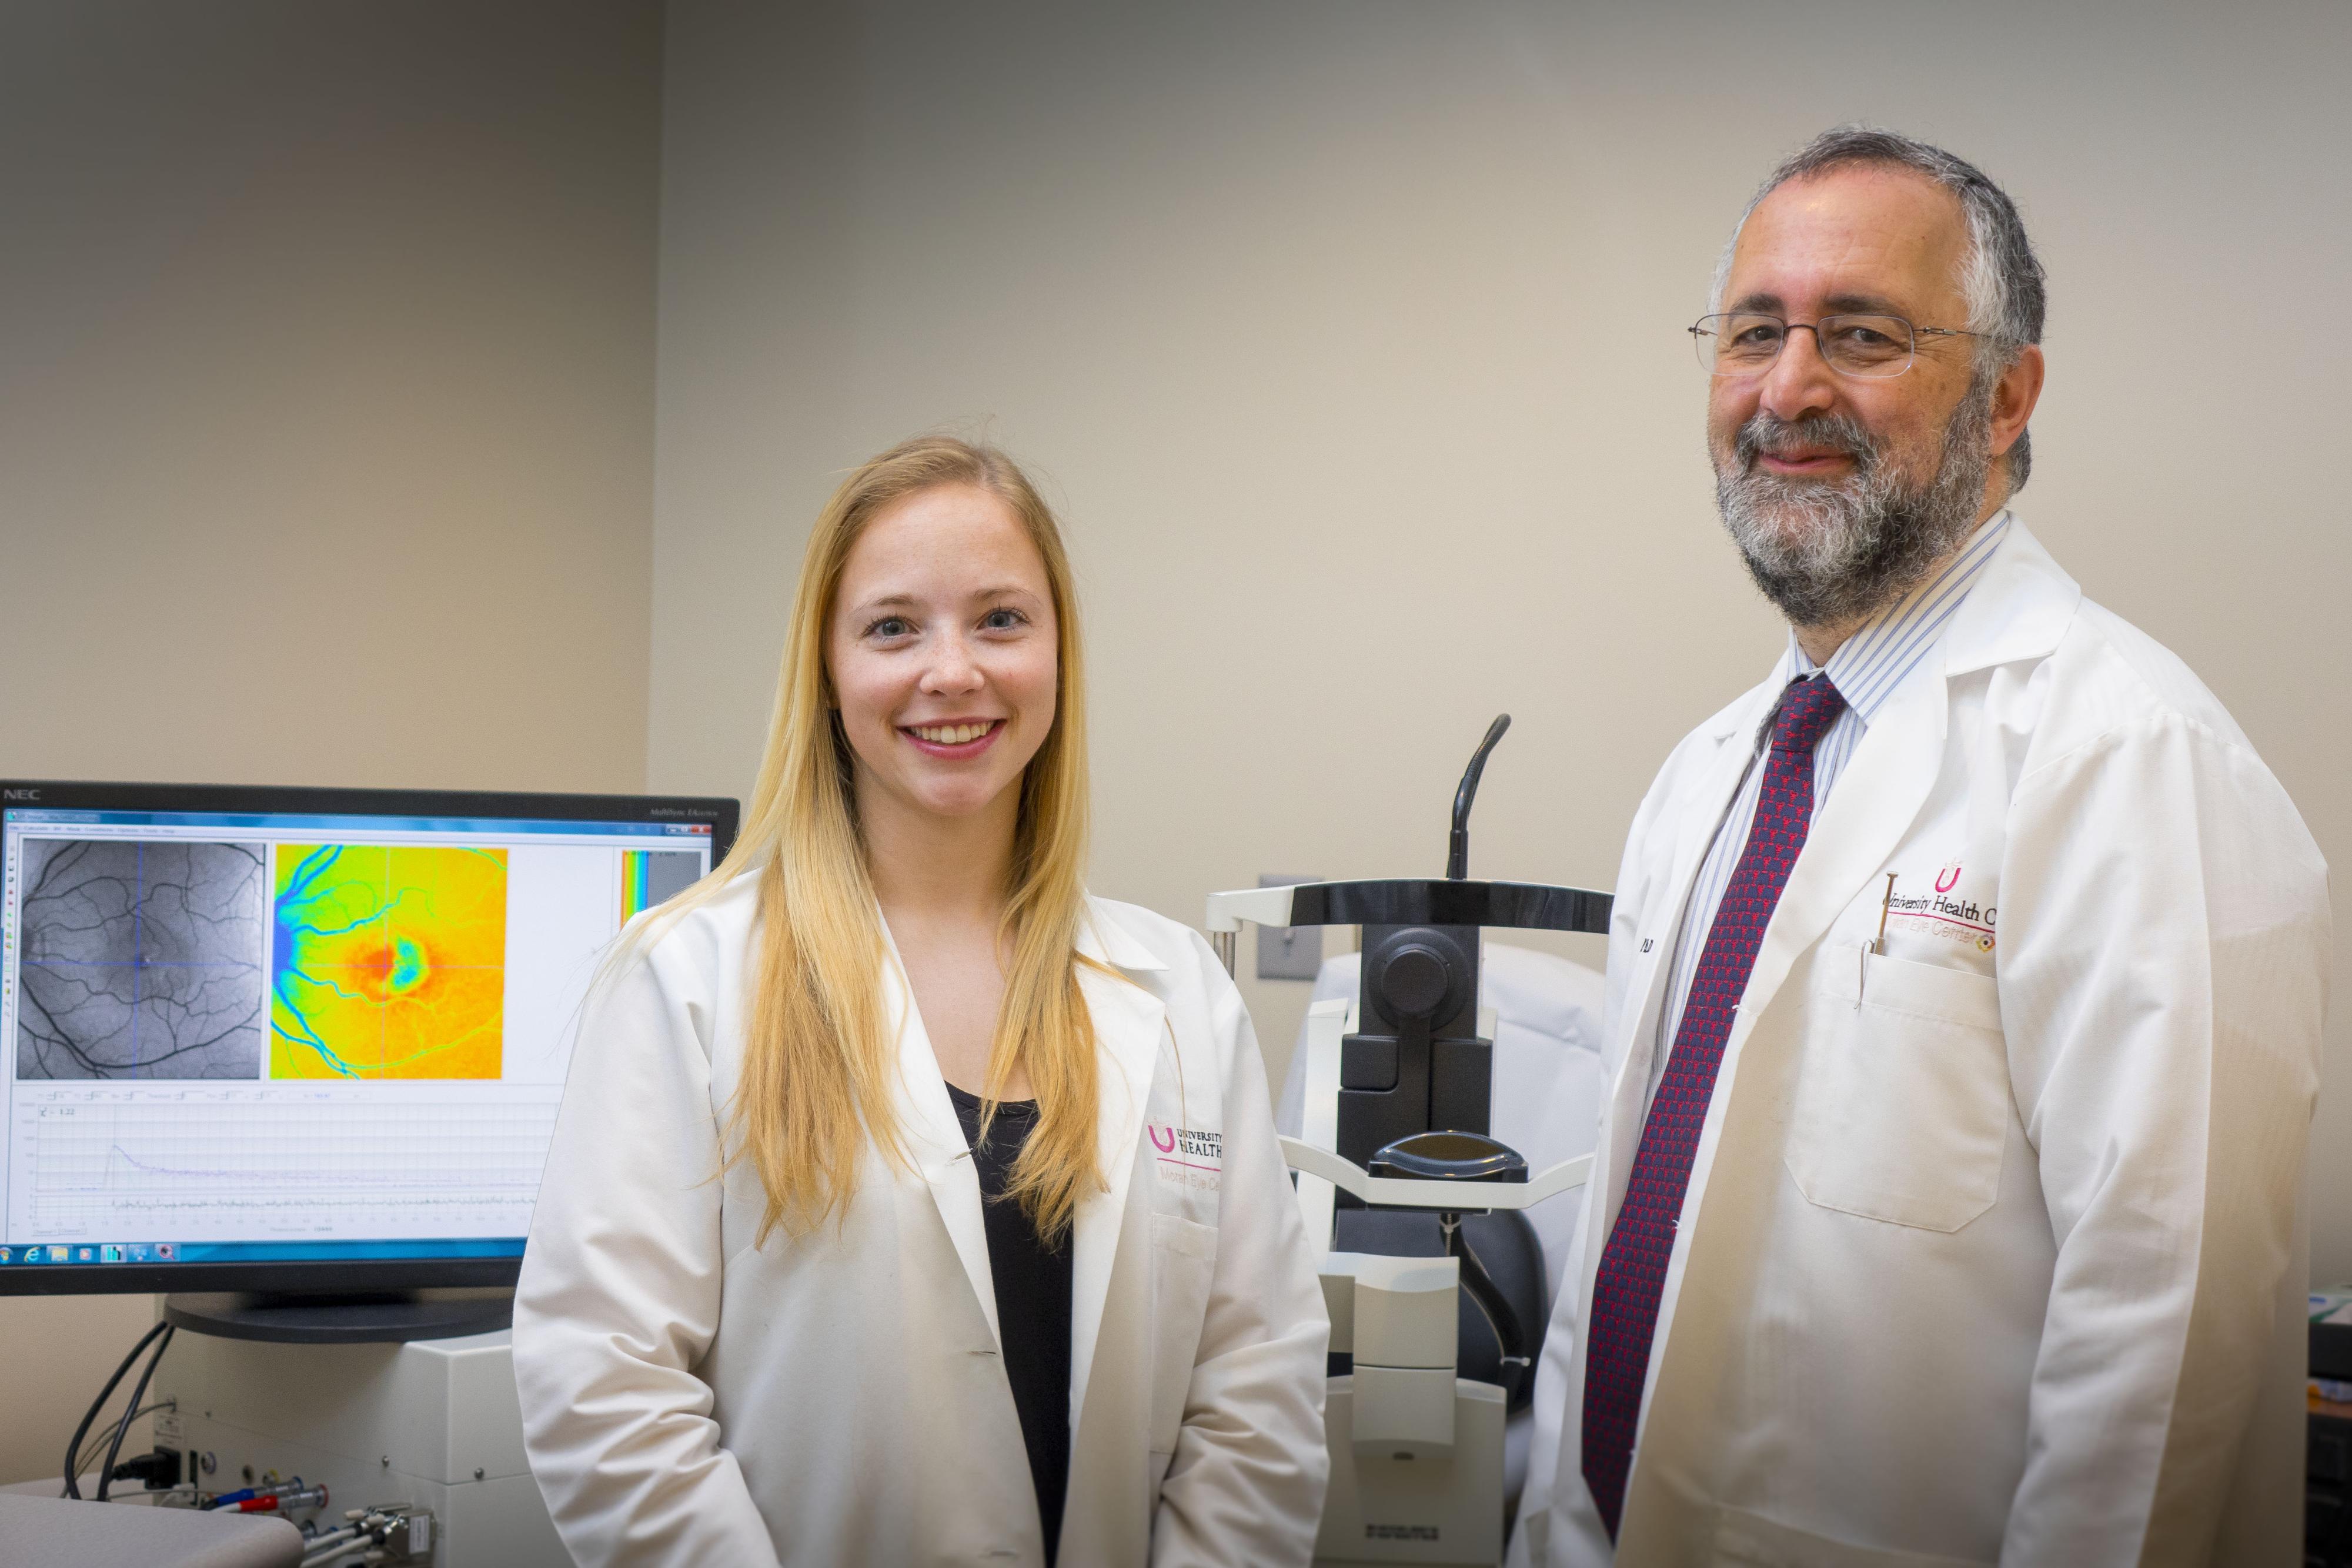 Moran’s Lydia Sauer, MD, and Paul S. Bernstein, MD, PhD, work with a cutting-edge, non-invasive imaging tool known as FLIO.